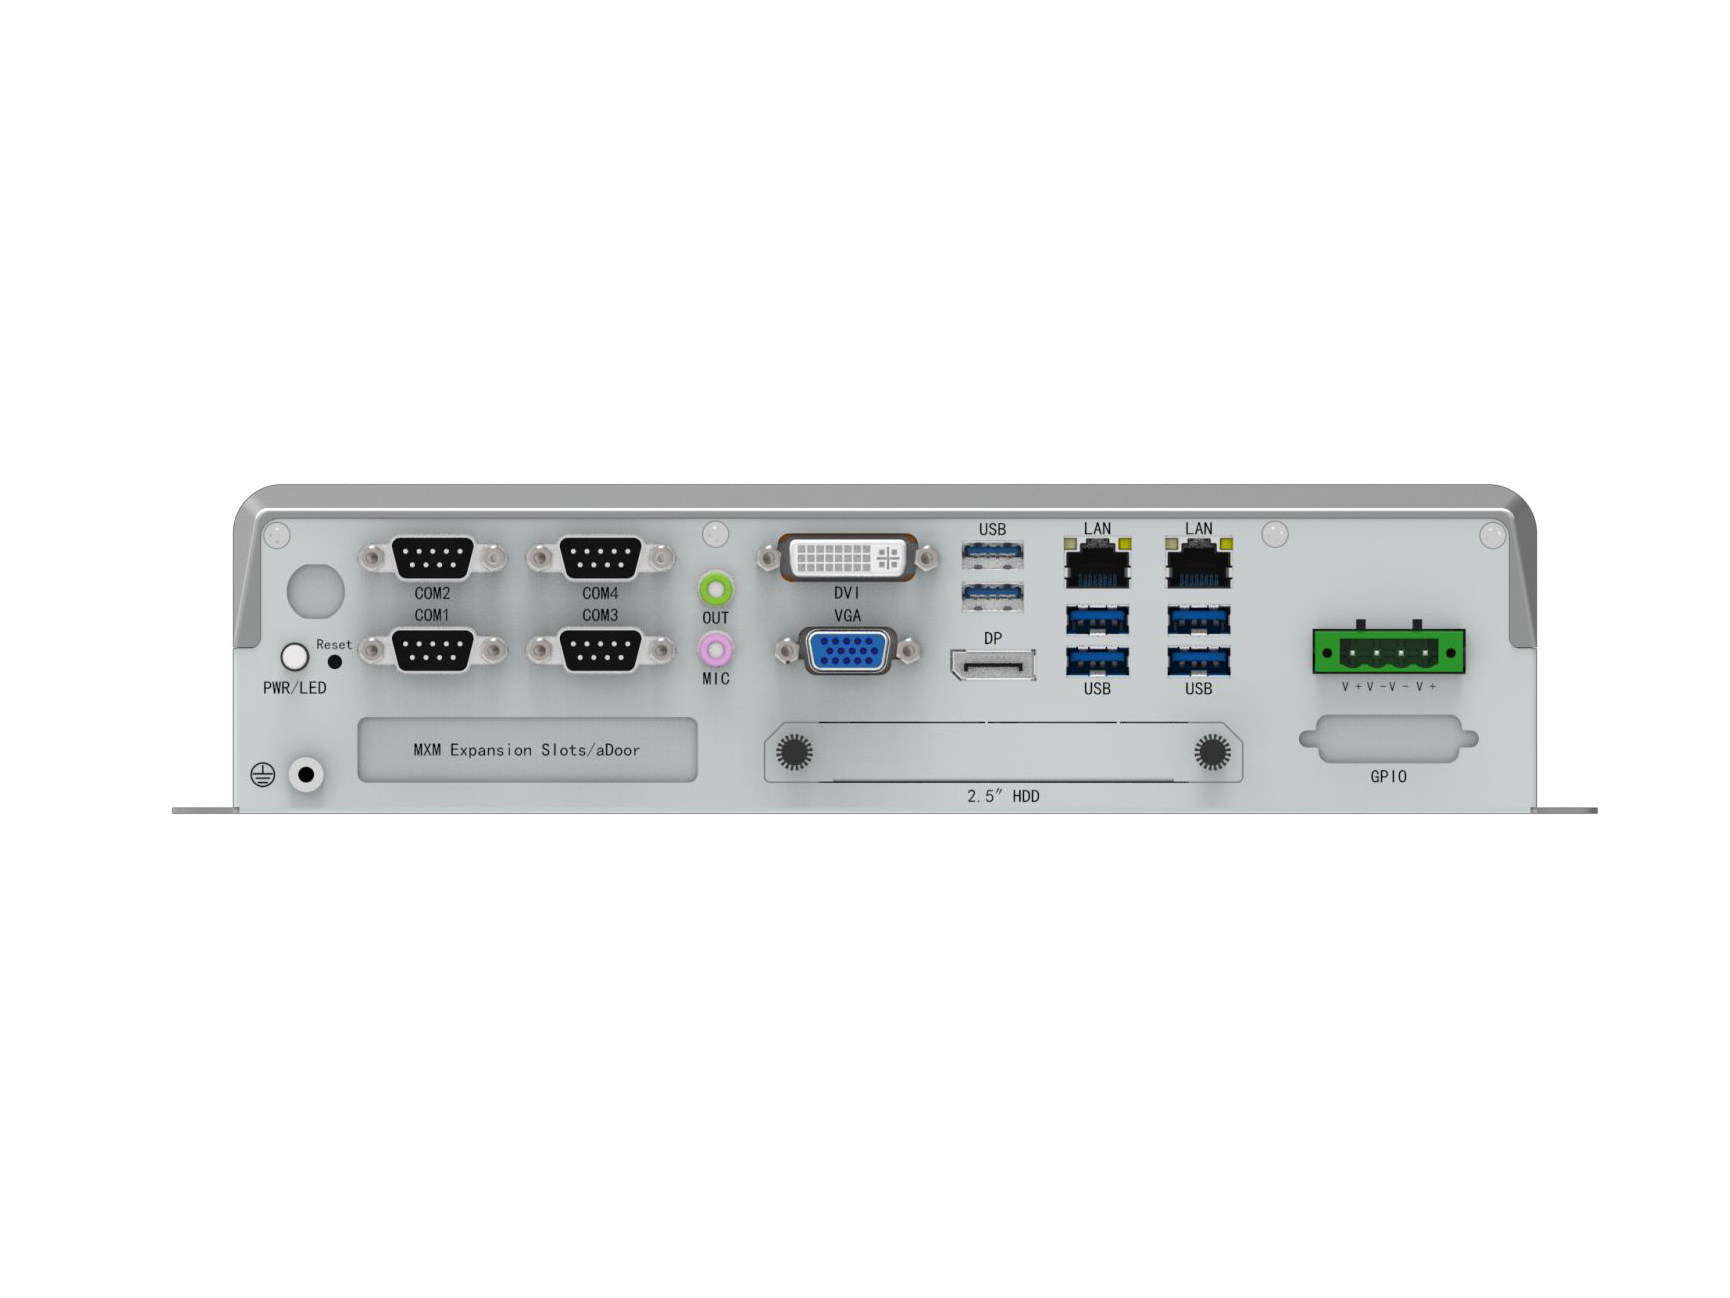 E7L Embedded Industrial PC